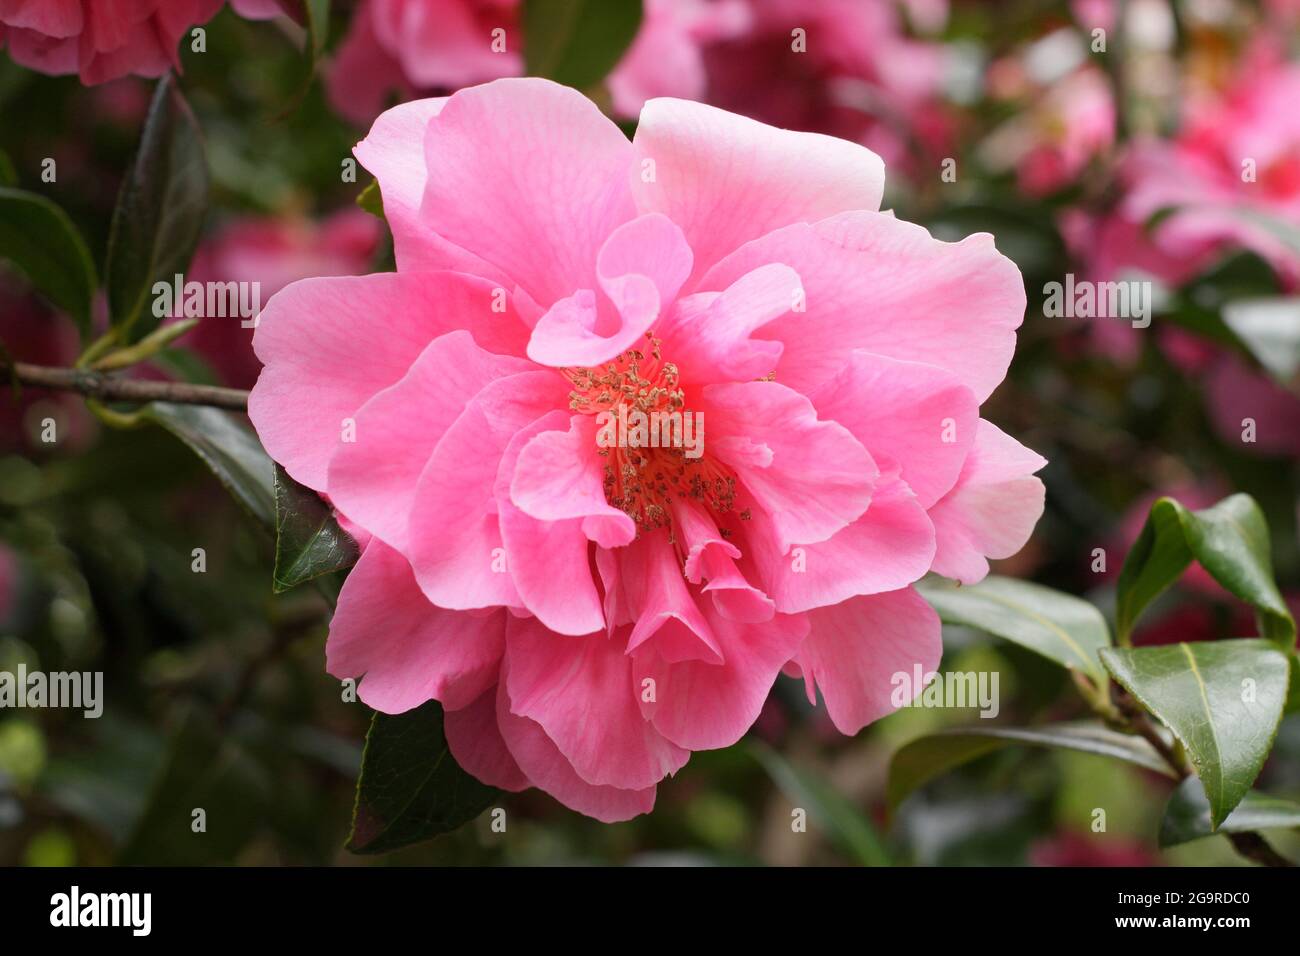 Camellia x williamsii 'Anticipation' displaying characteristic double pink blossoms in spring. UK Stock Photo